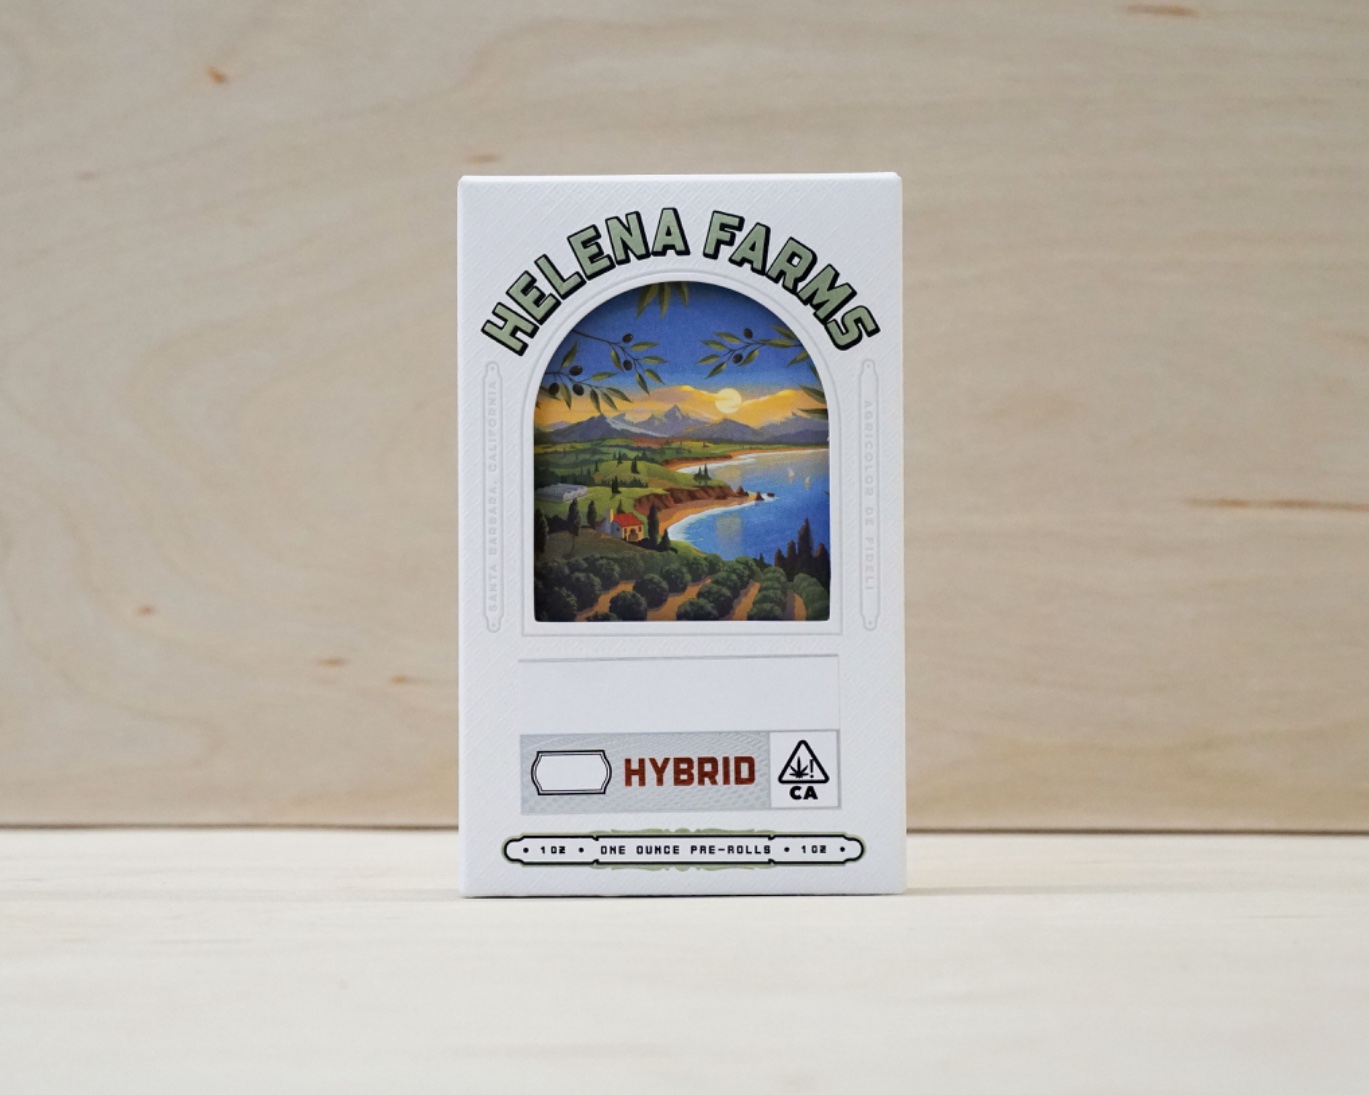 Helena Farms 70-Pack Pre- Roll Packaging Brings An New Consumer Experience To The Market